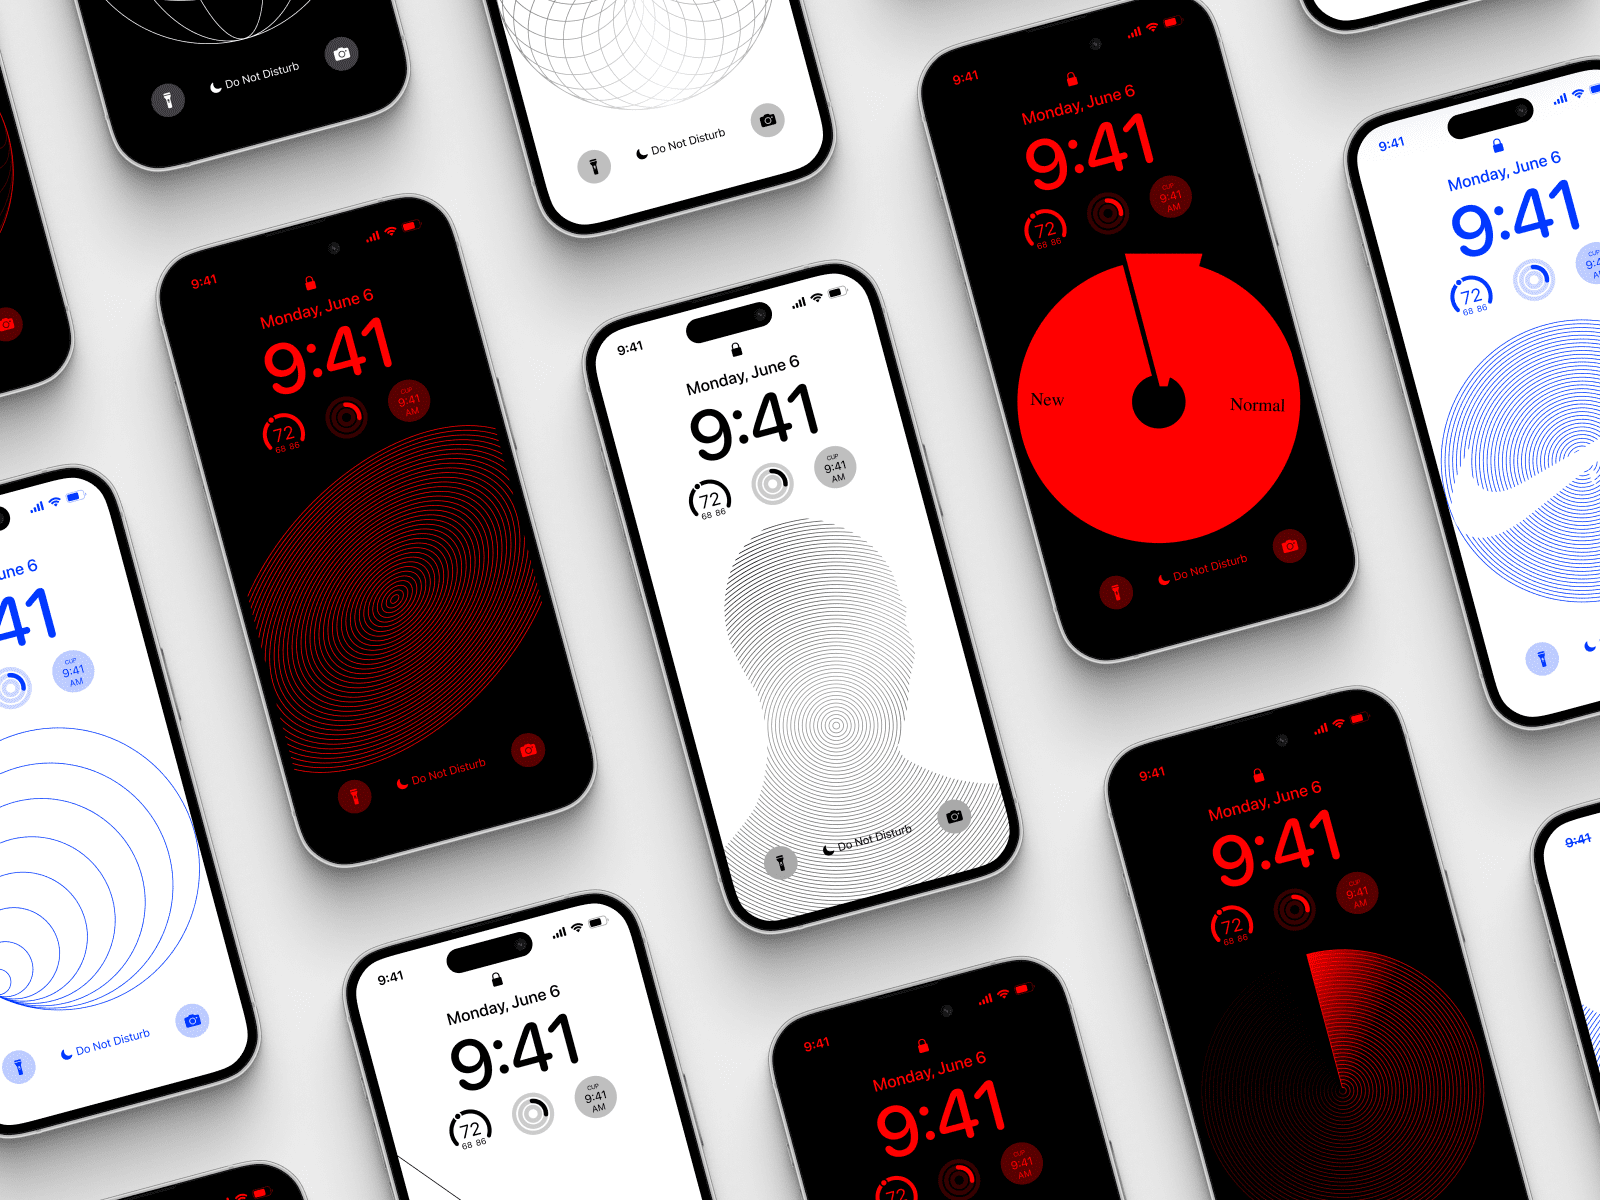 Tattoo Style iPhone Wallpaper HD - iPhone Wallpapers